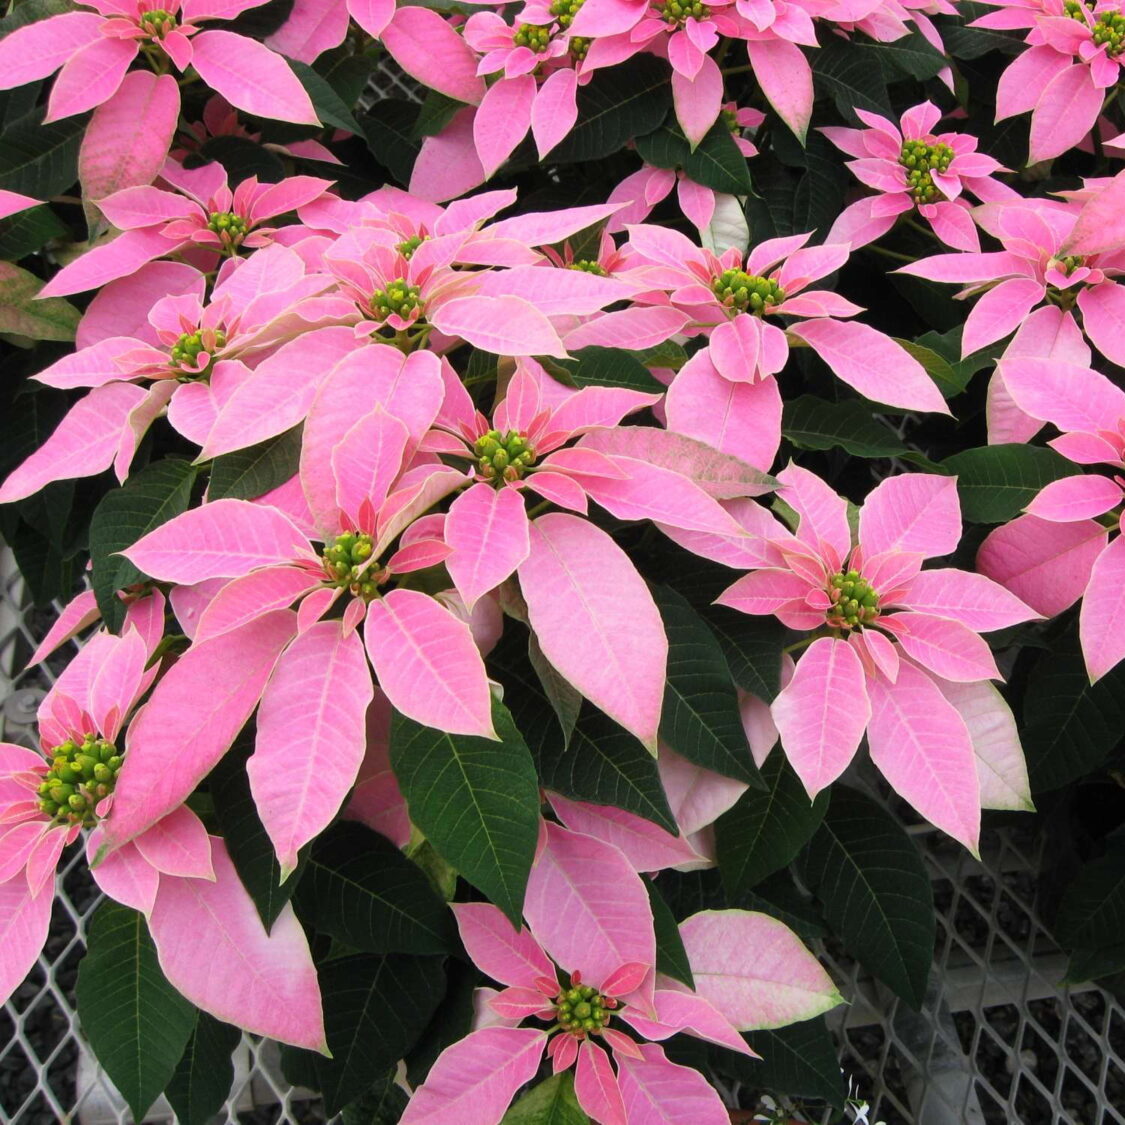 Albums 93+ Images show me a picture of a poinsettia Updated